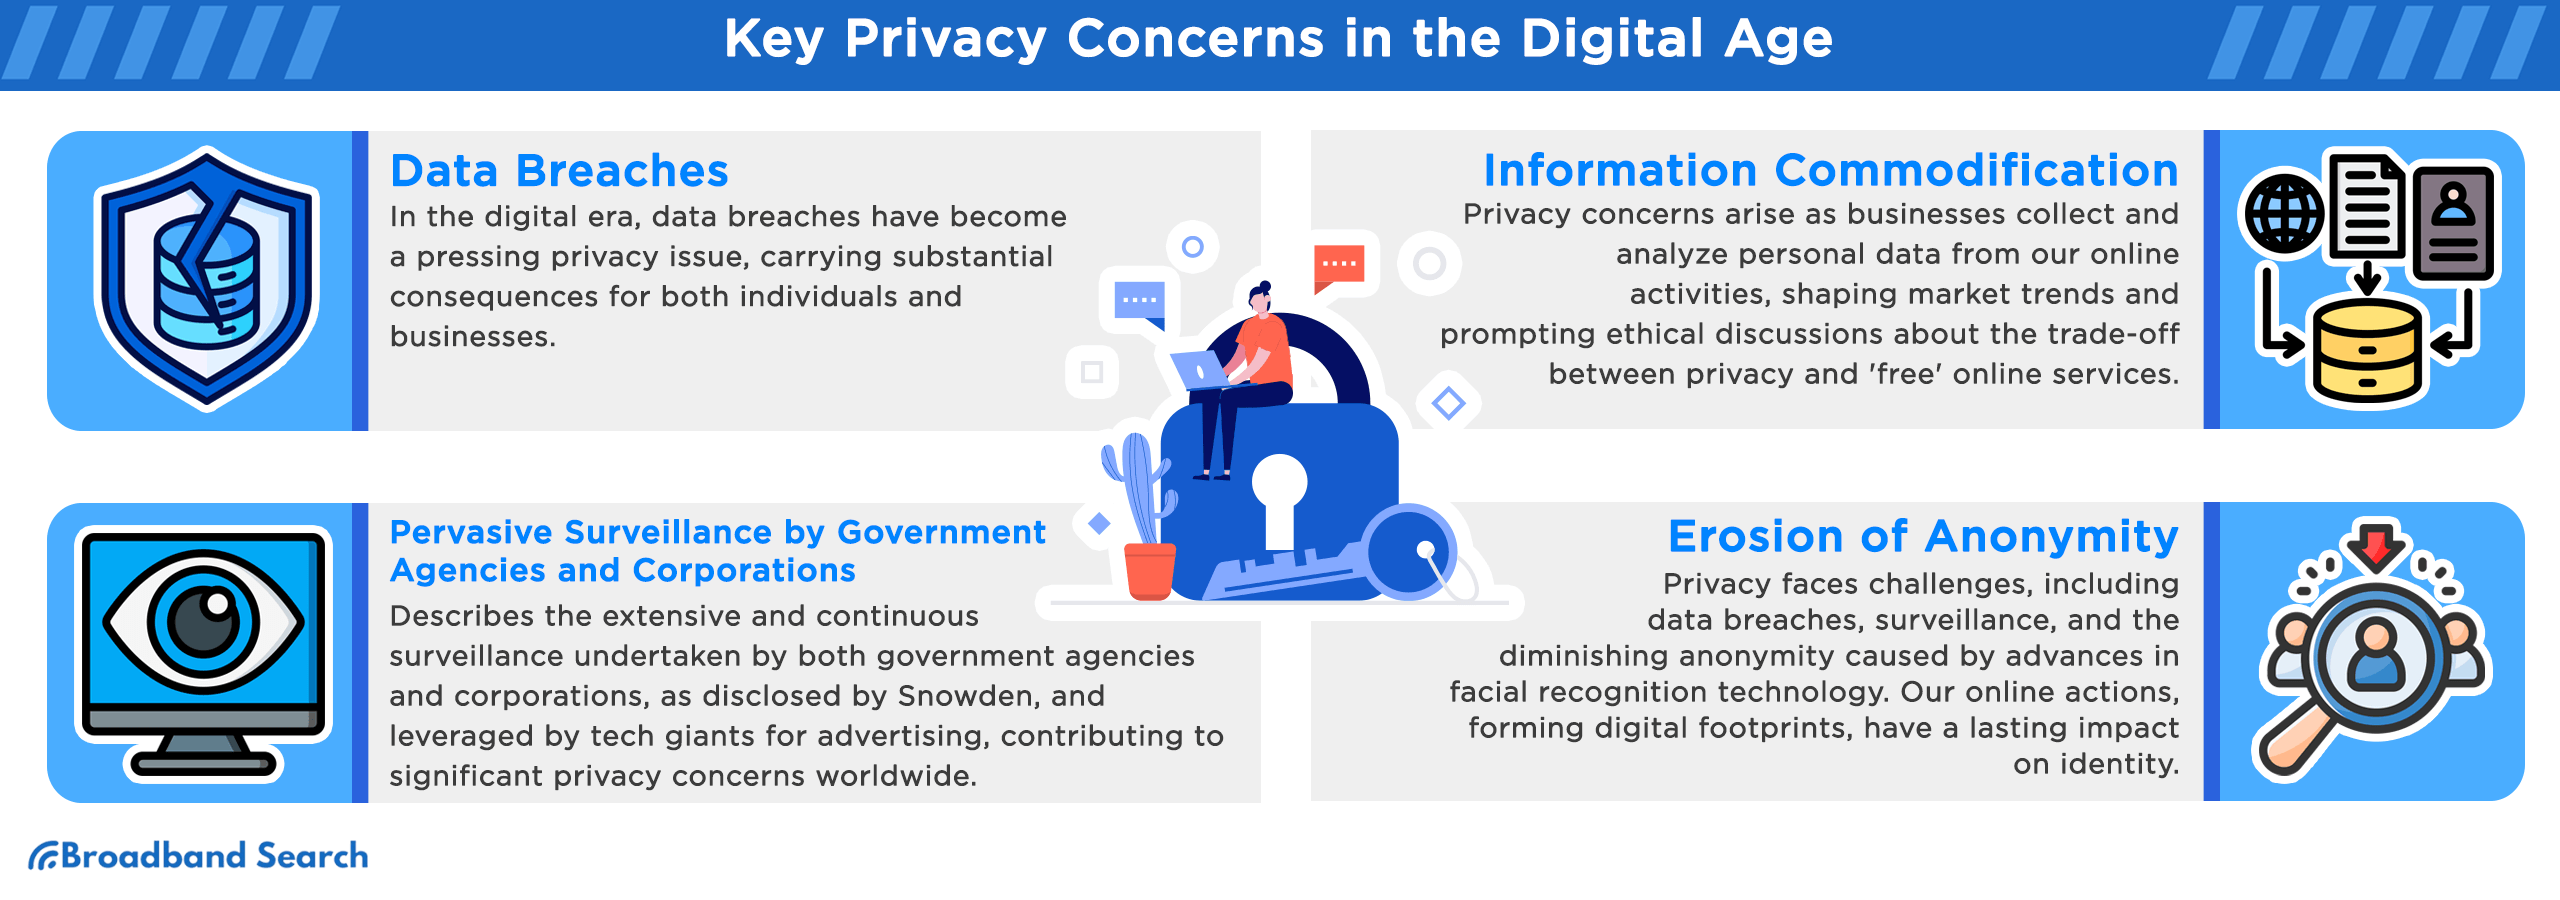 Four Key privacy concerns in the digital age